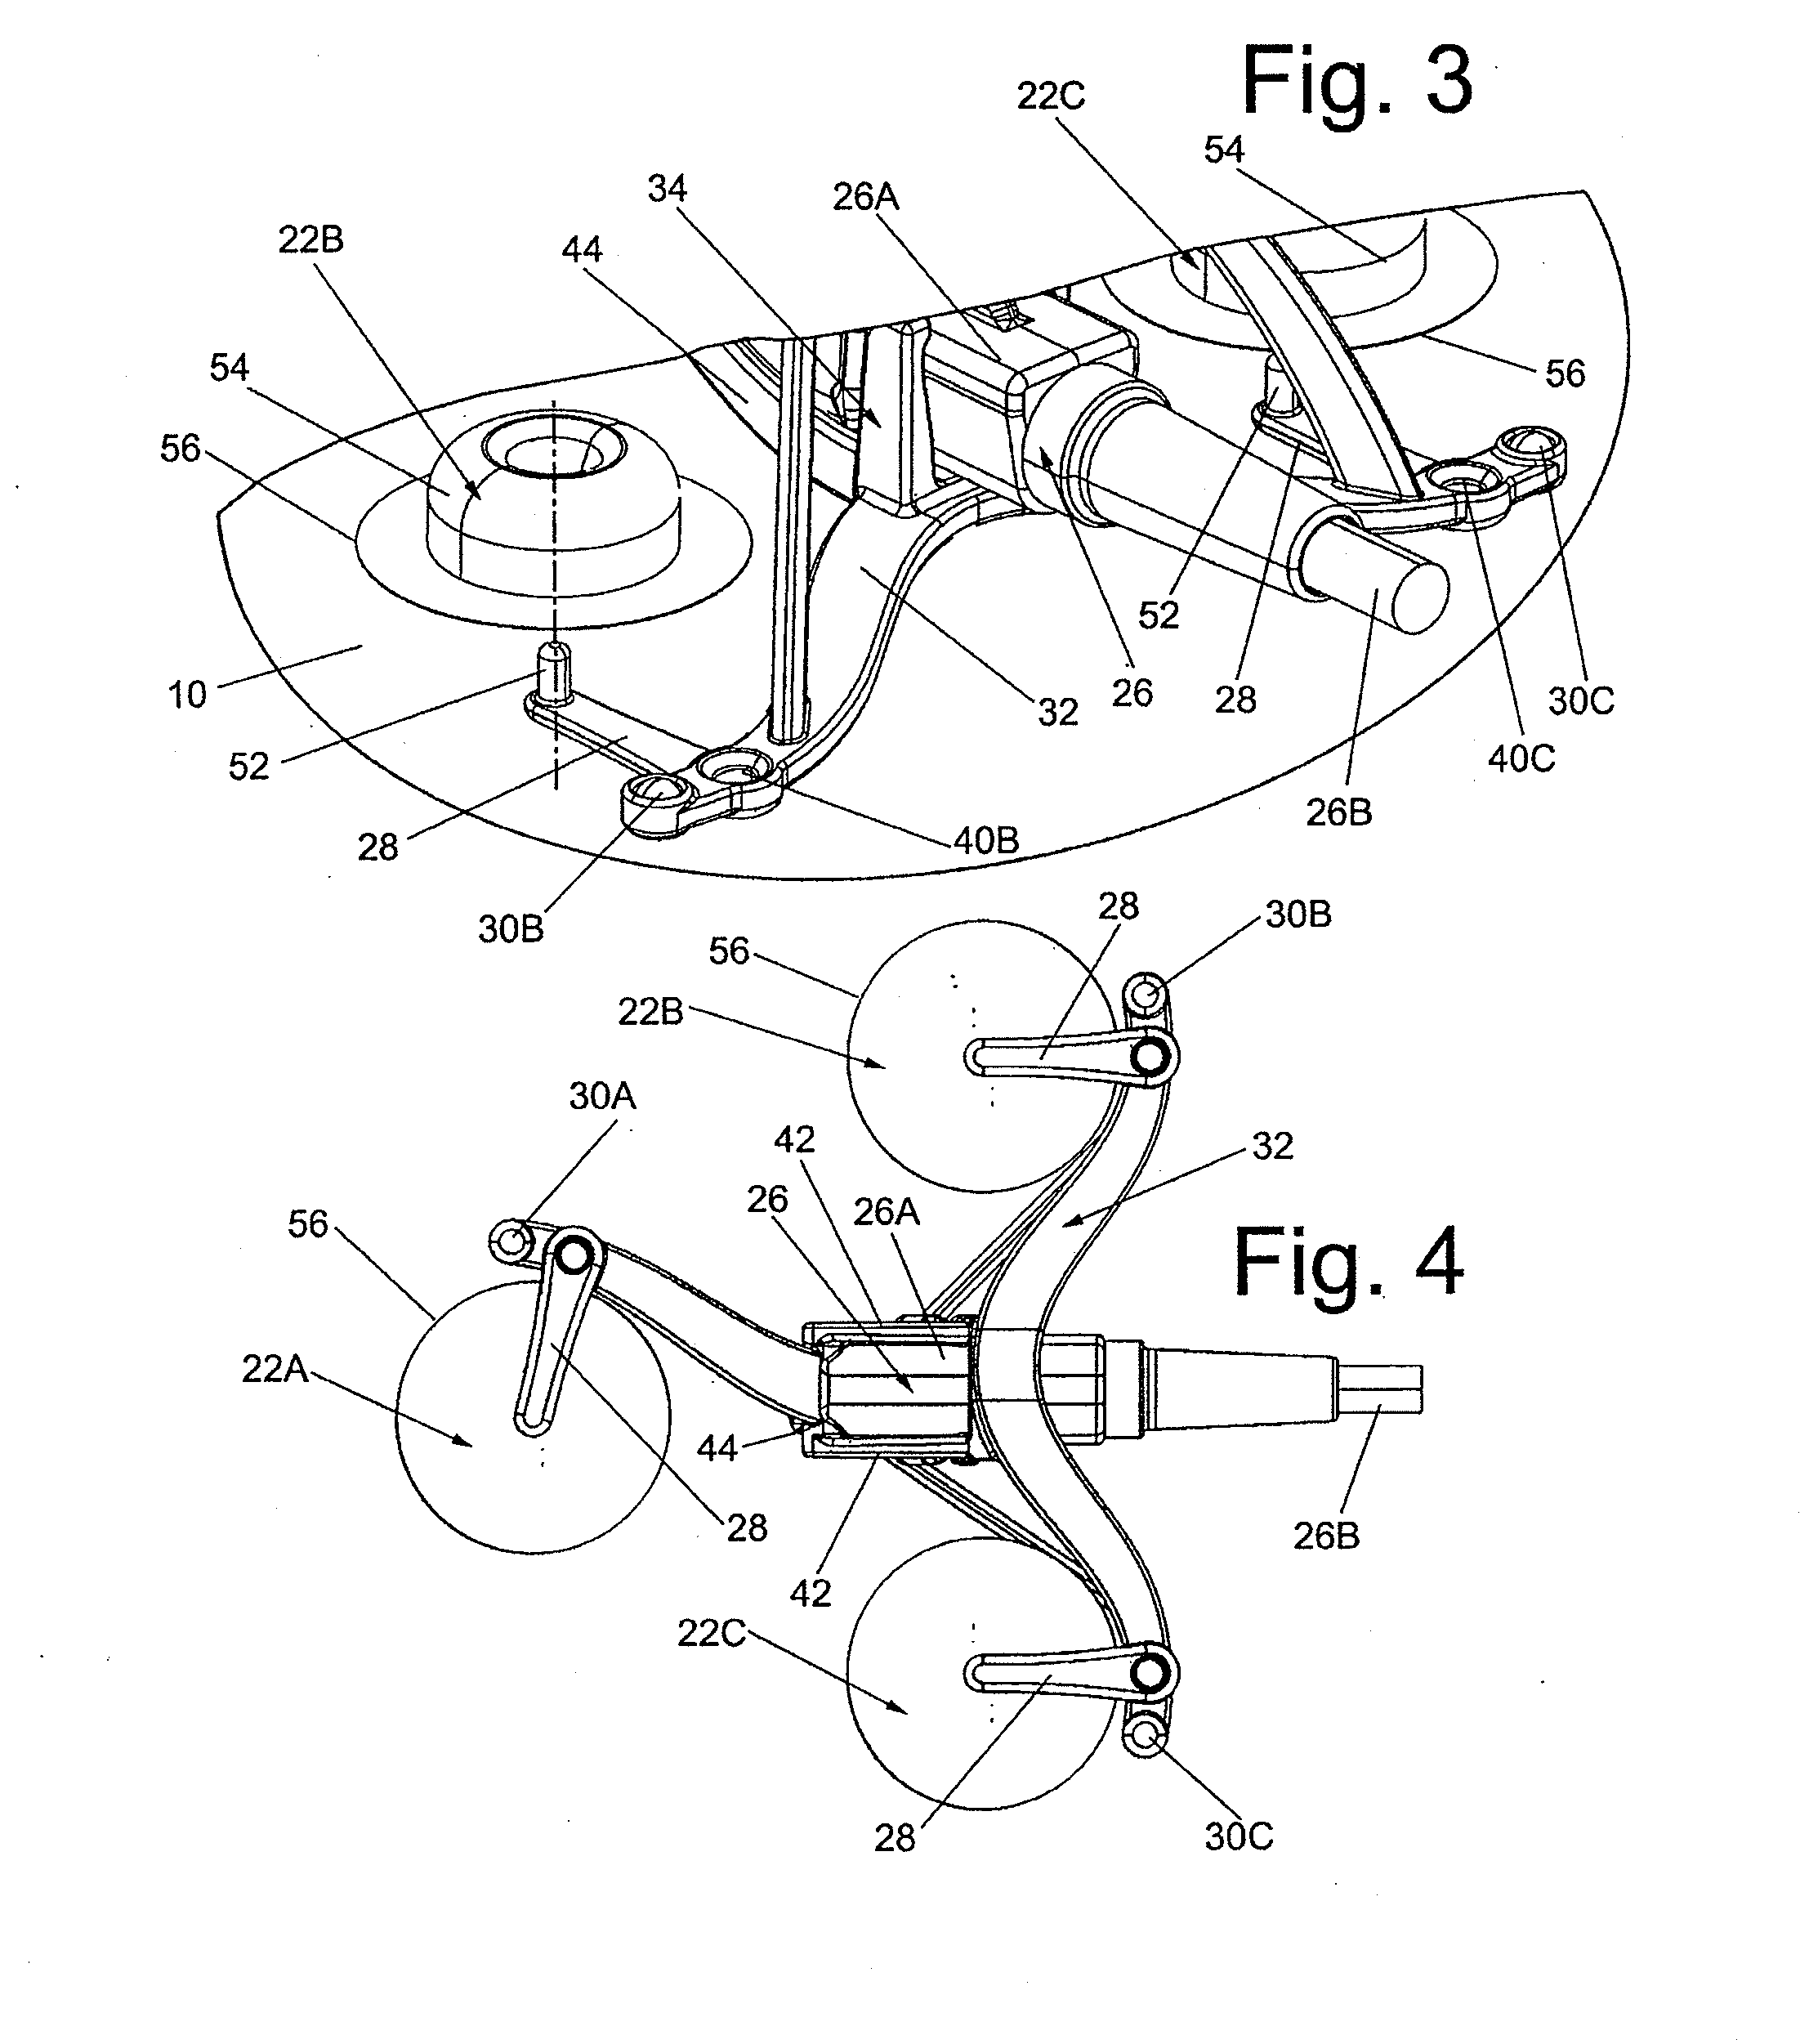 Active marker device for use in electromagnetic tracking system